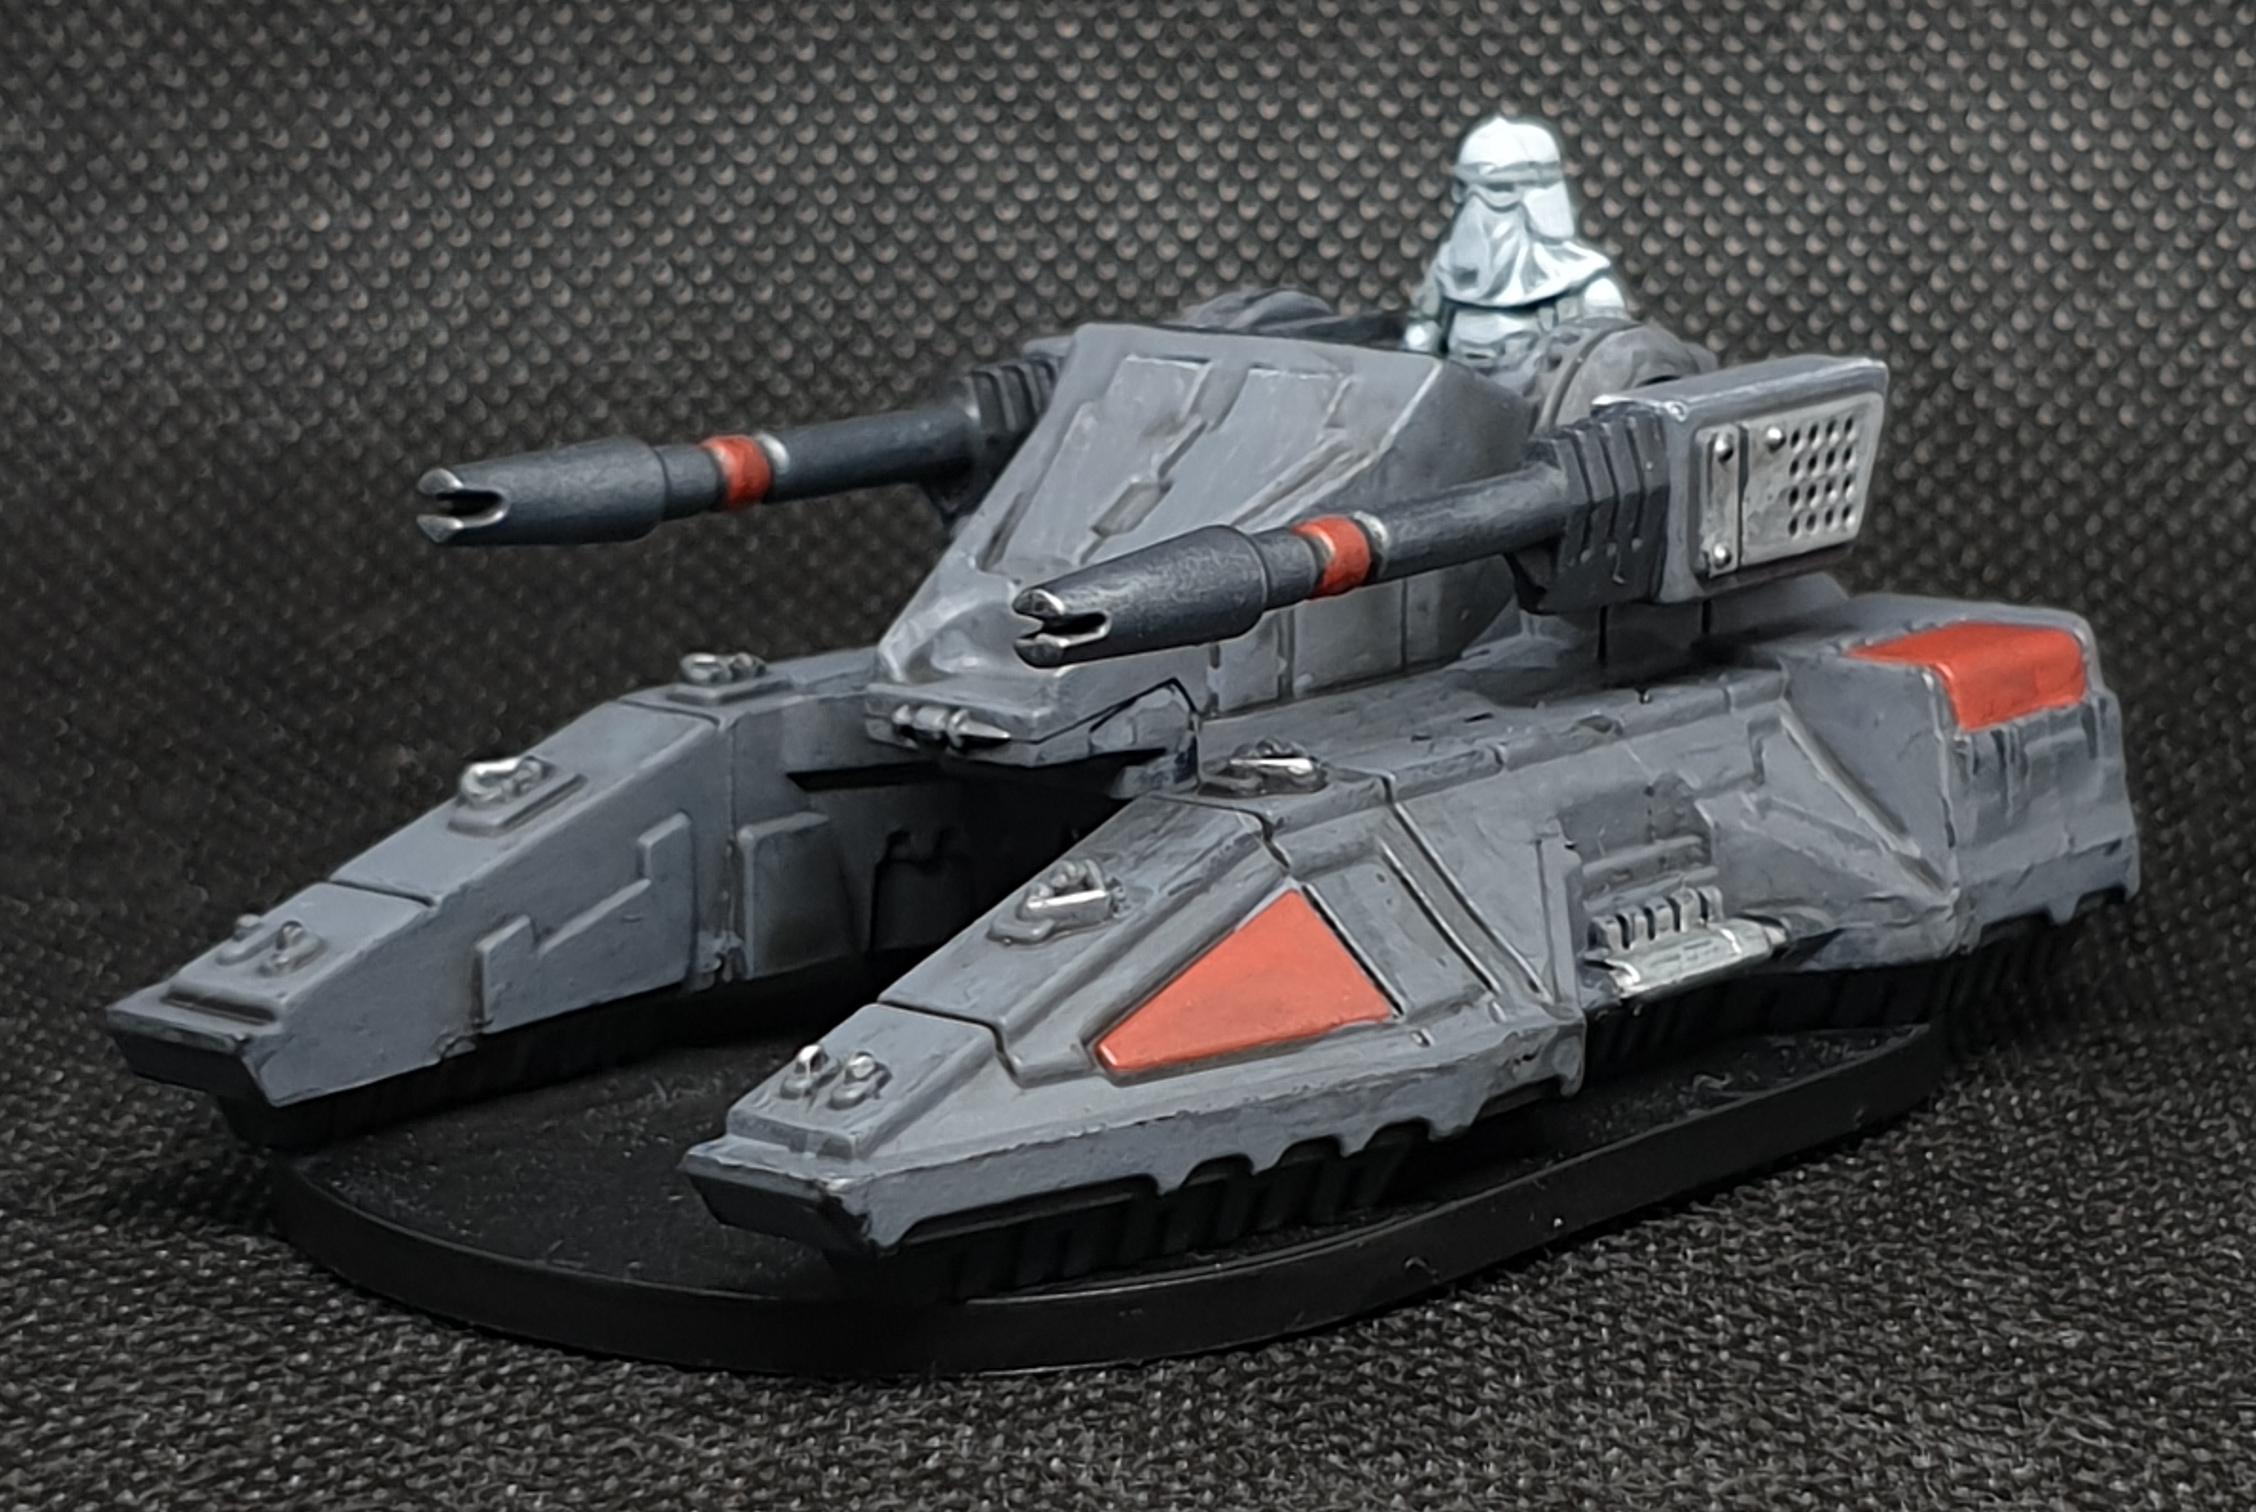 Imperial, Imperial Assault, Vehicle